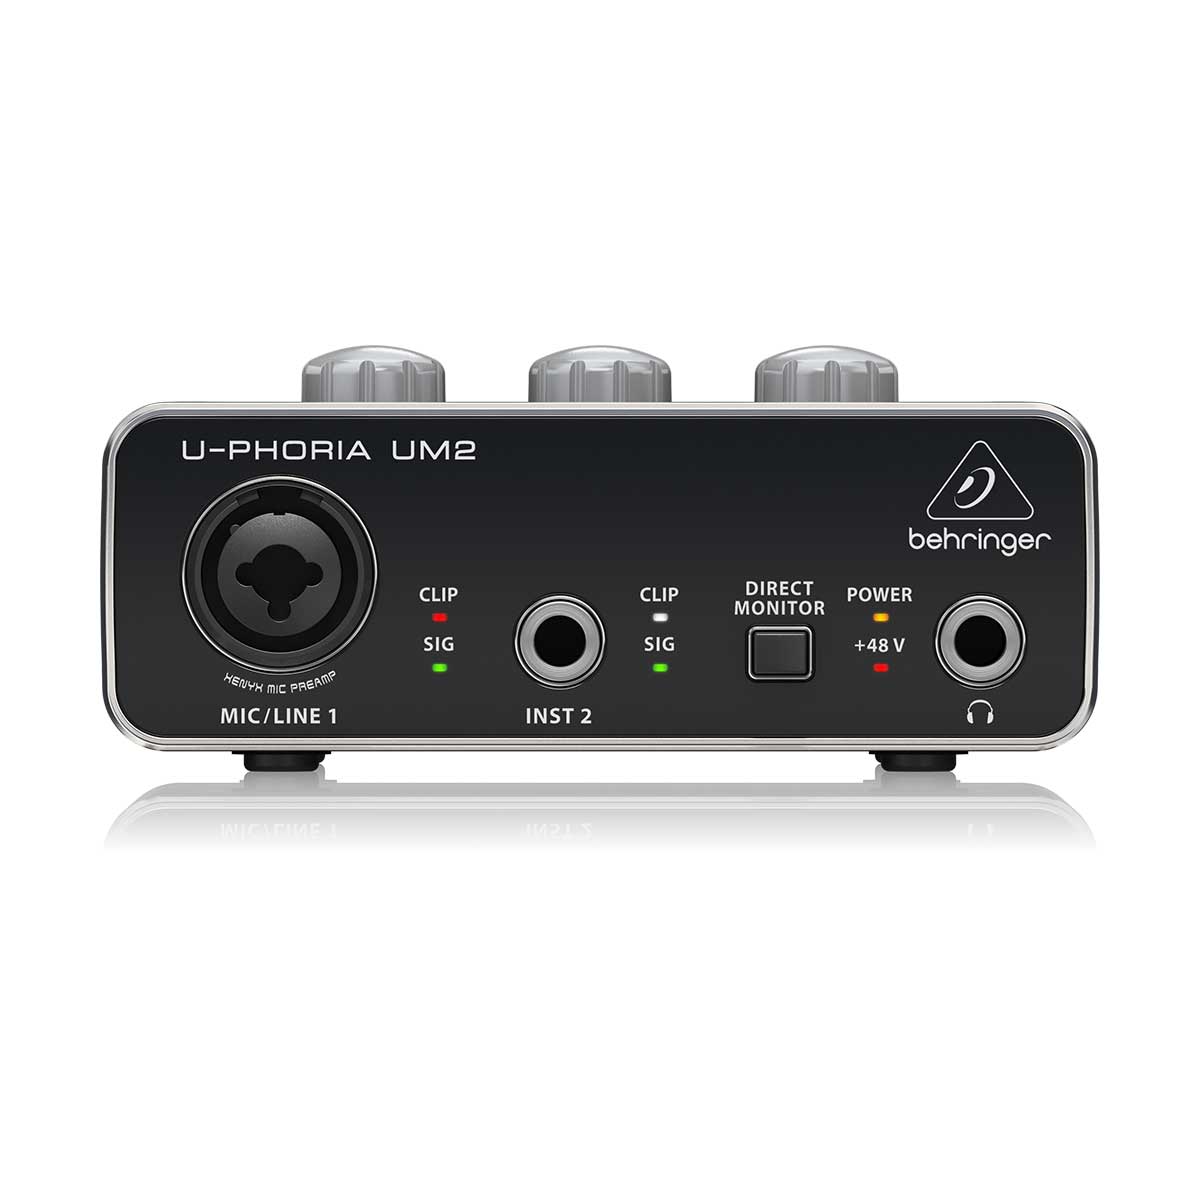 Behringer Euphoria UM2 2x2 USB Audio Interface with XENYX Mic Preamplifier